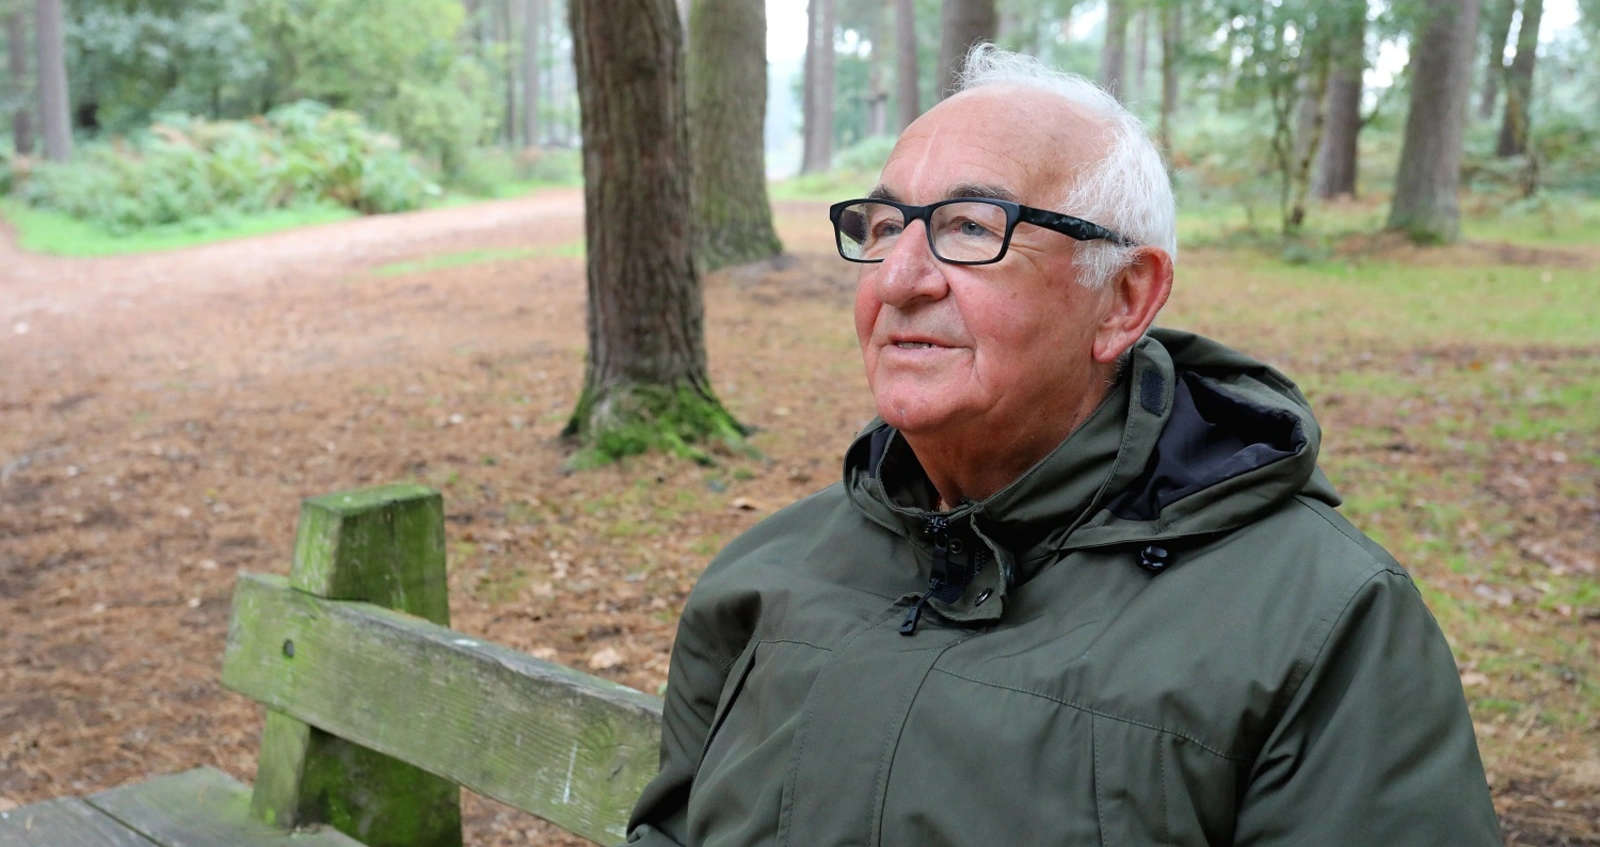 Army veteran Malcolm sat on a bench in a park